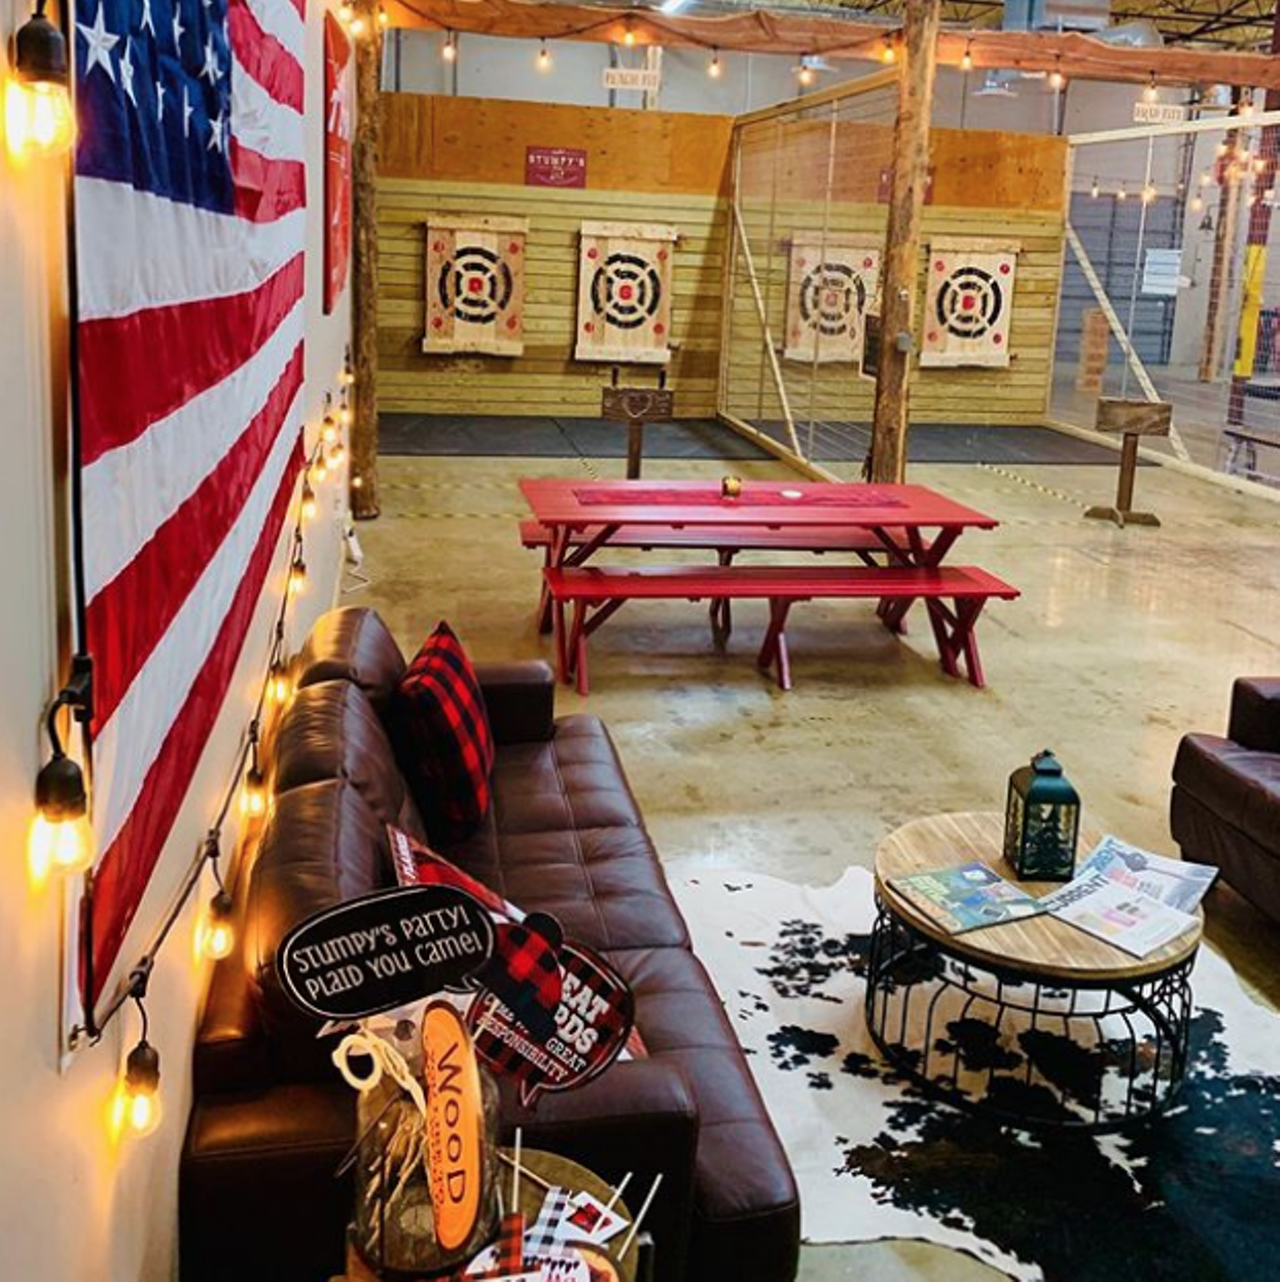 Try your hand at axe-throwing
758 Isom Road, (210) 693-6900, stumpyshh.com
Engage in the challenging activity of axe-throwing on the next rainy day. While there’s a growing number of options to choose from in San Antonio, you’re likely to have a testosterone-filled blast at Stumpy’s Hatchet House. Here you’ll be able to get boozy (it’s BYOB), throw some axes and of course stay dry.
Photo via Instagram / stumpyssat